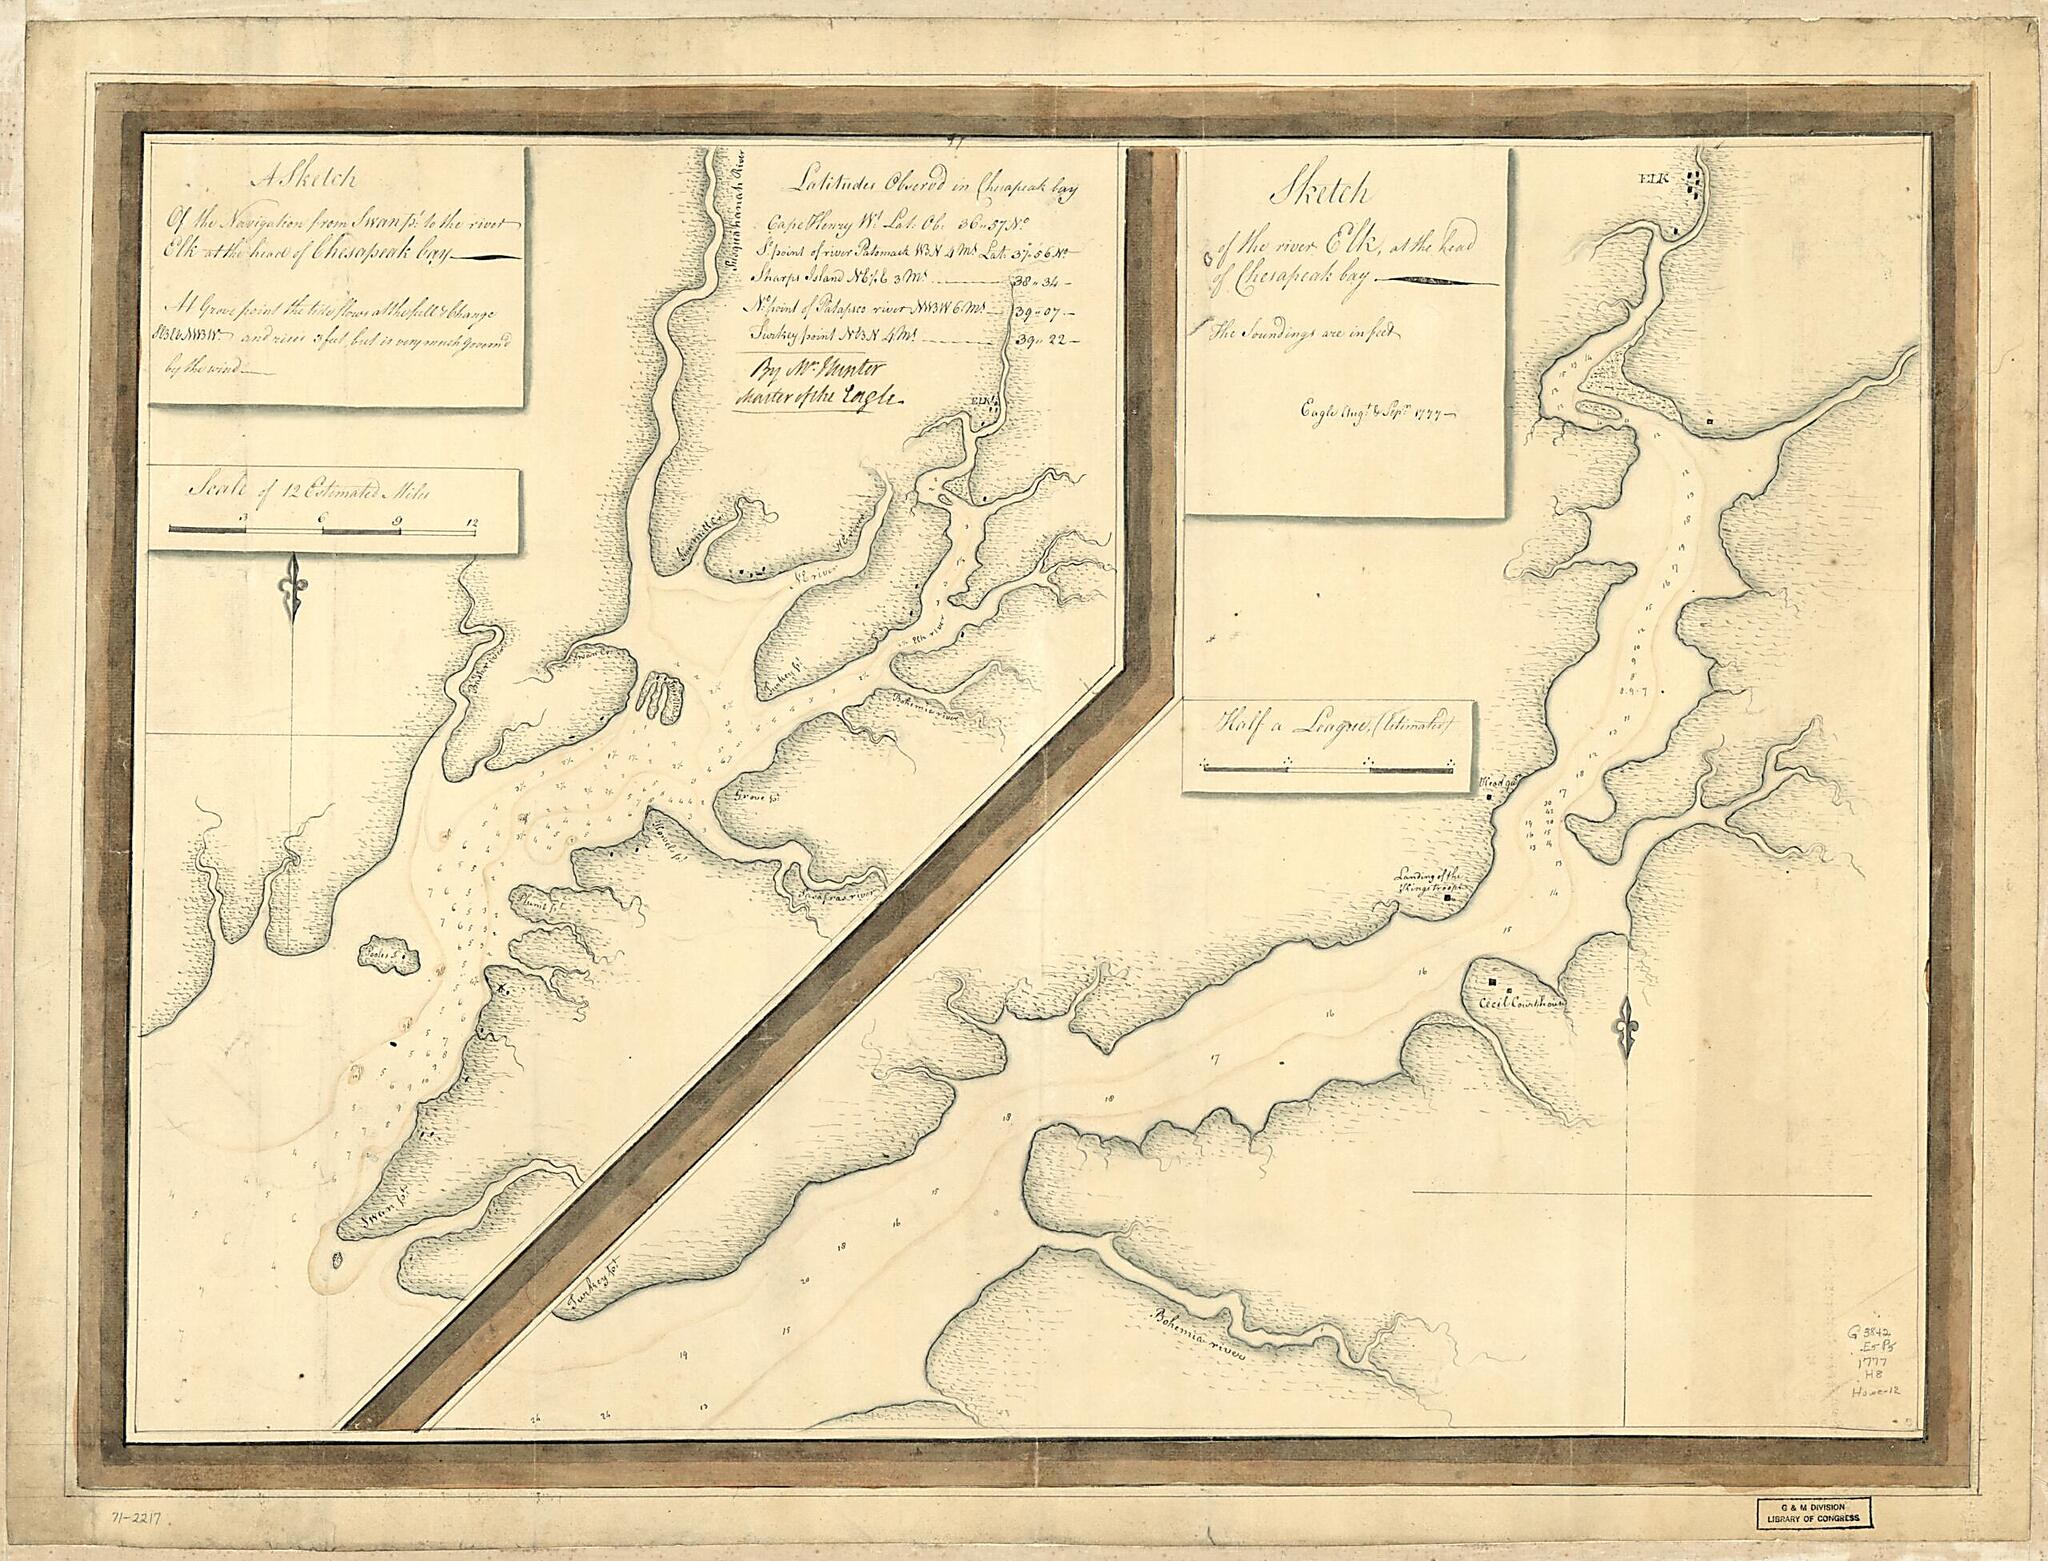 This old map of A Sketch of the Navigation from Swan Pt. to the River Elk at the Head of Chesapeak Bay. Sketch of the River Elk, at the Head of Chesapeak Bay from 1777 was created by John Hunter in 1777